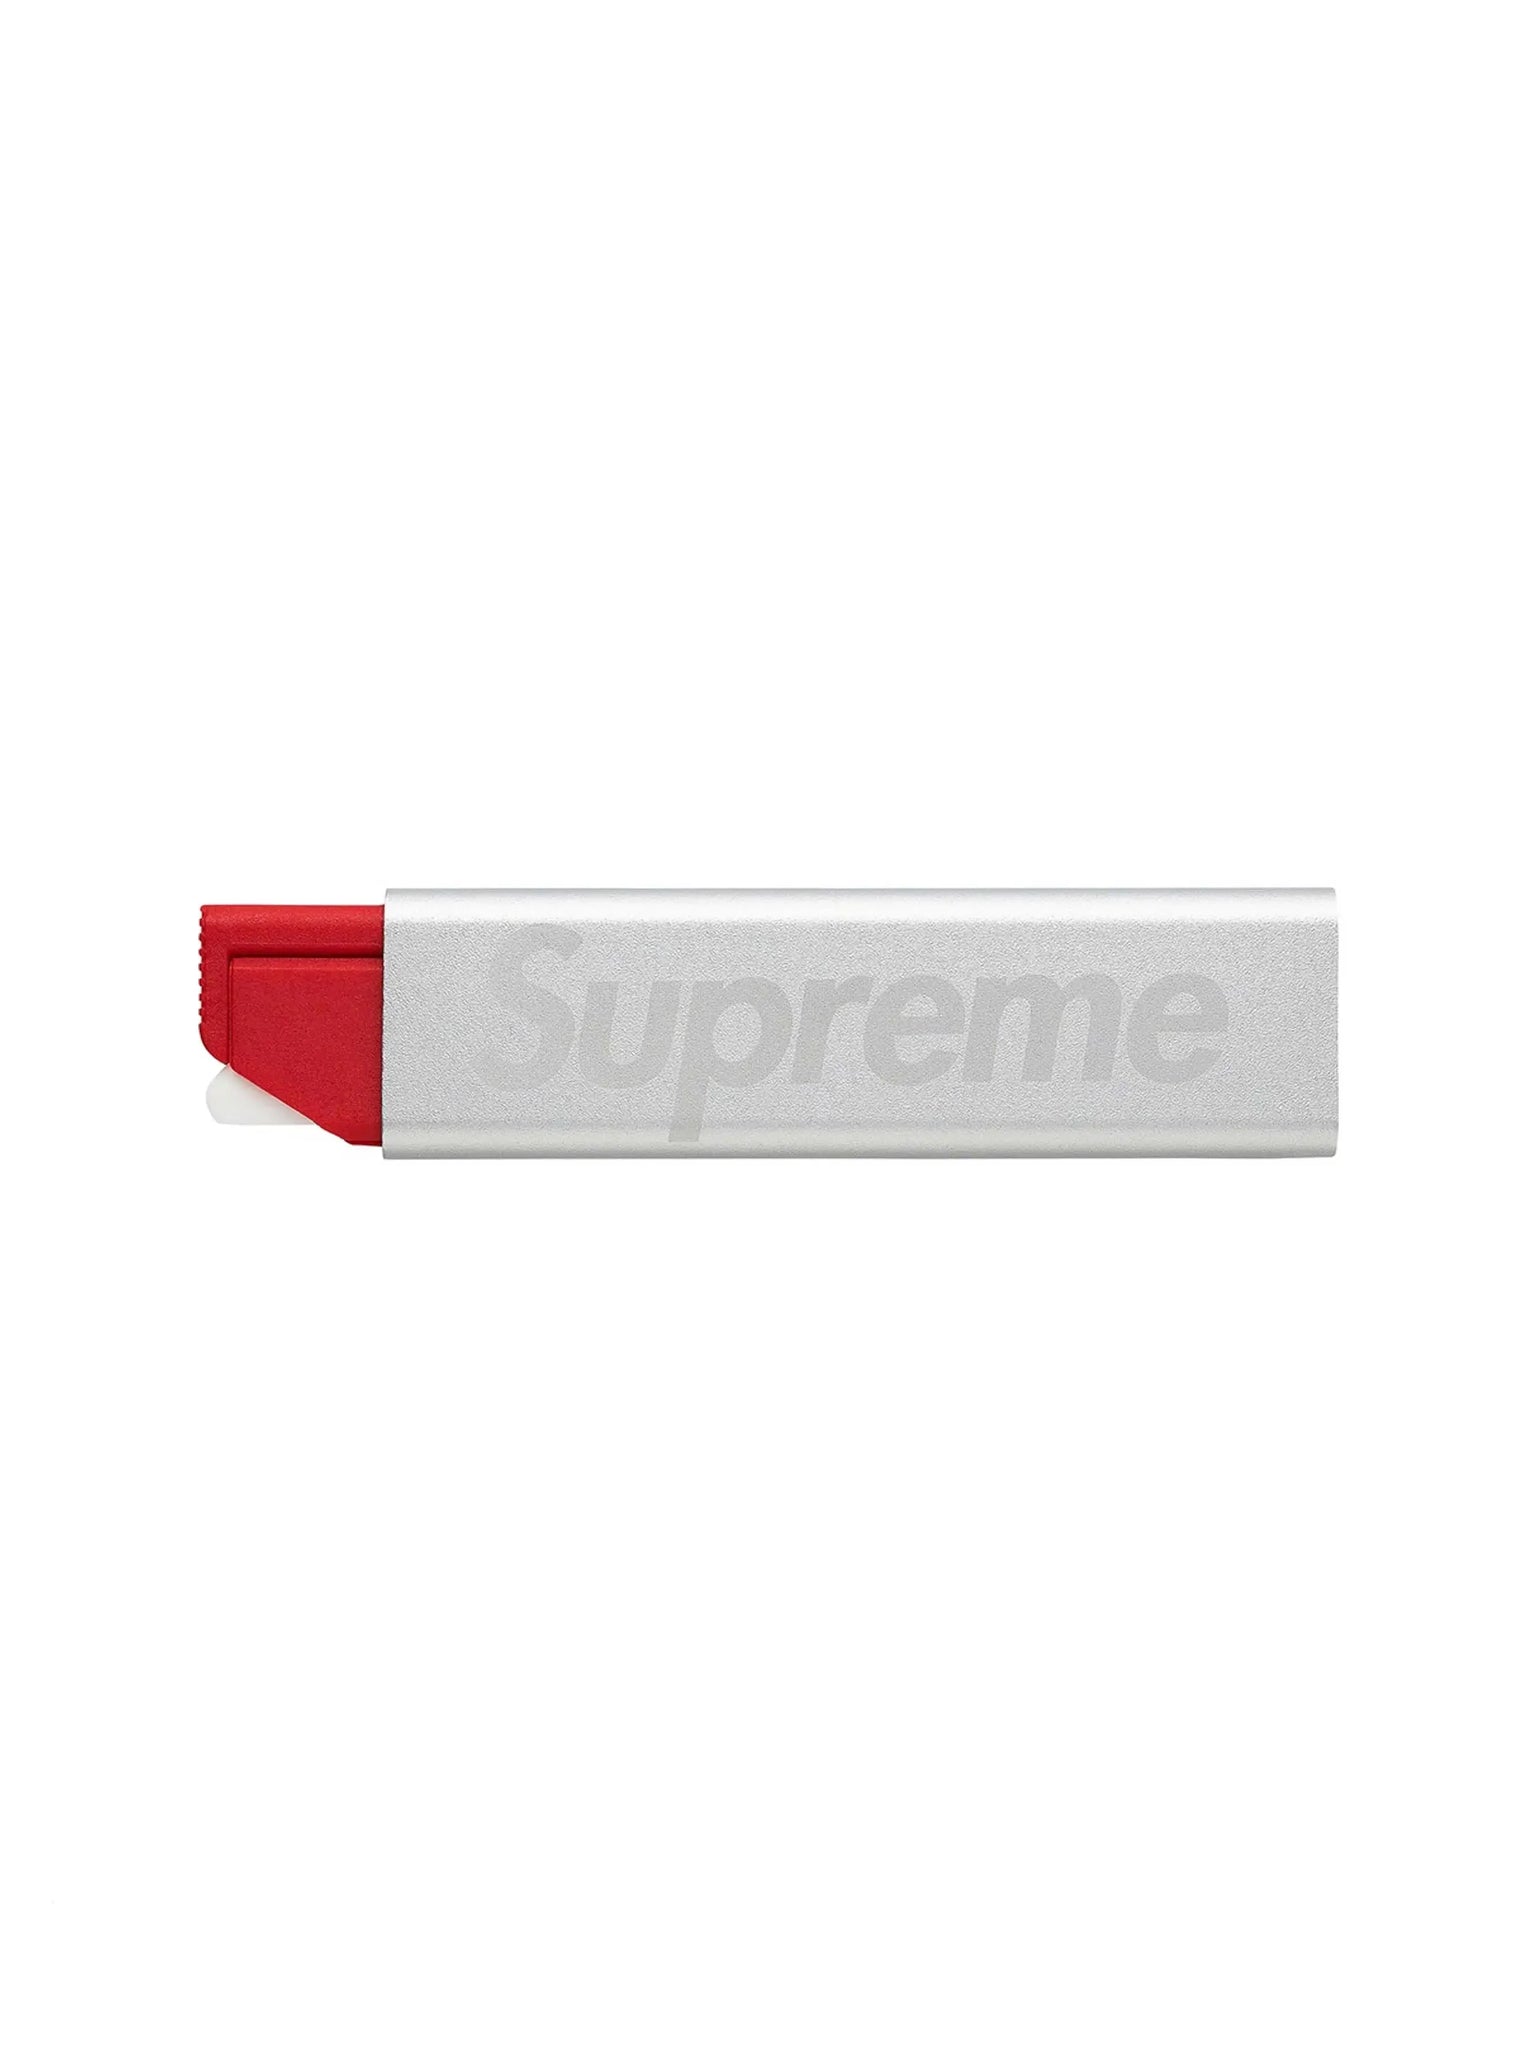 Supreme Slice Manual Carton Cutter Silver in Auckland, New Zealand - Shop name